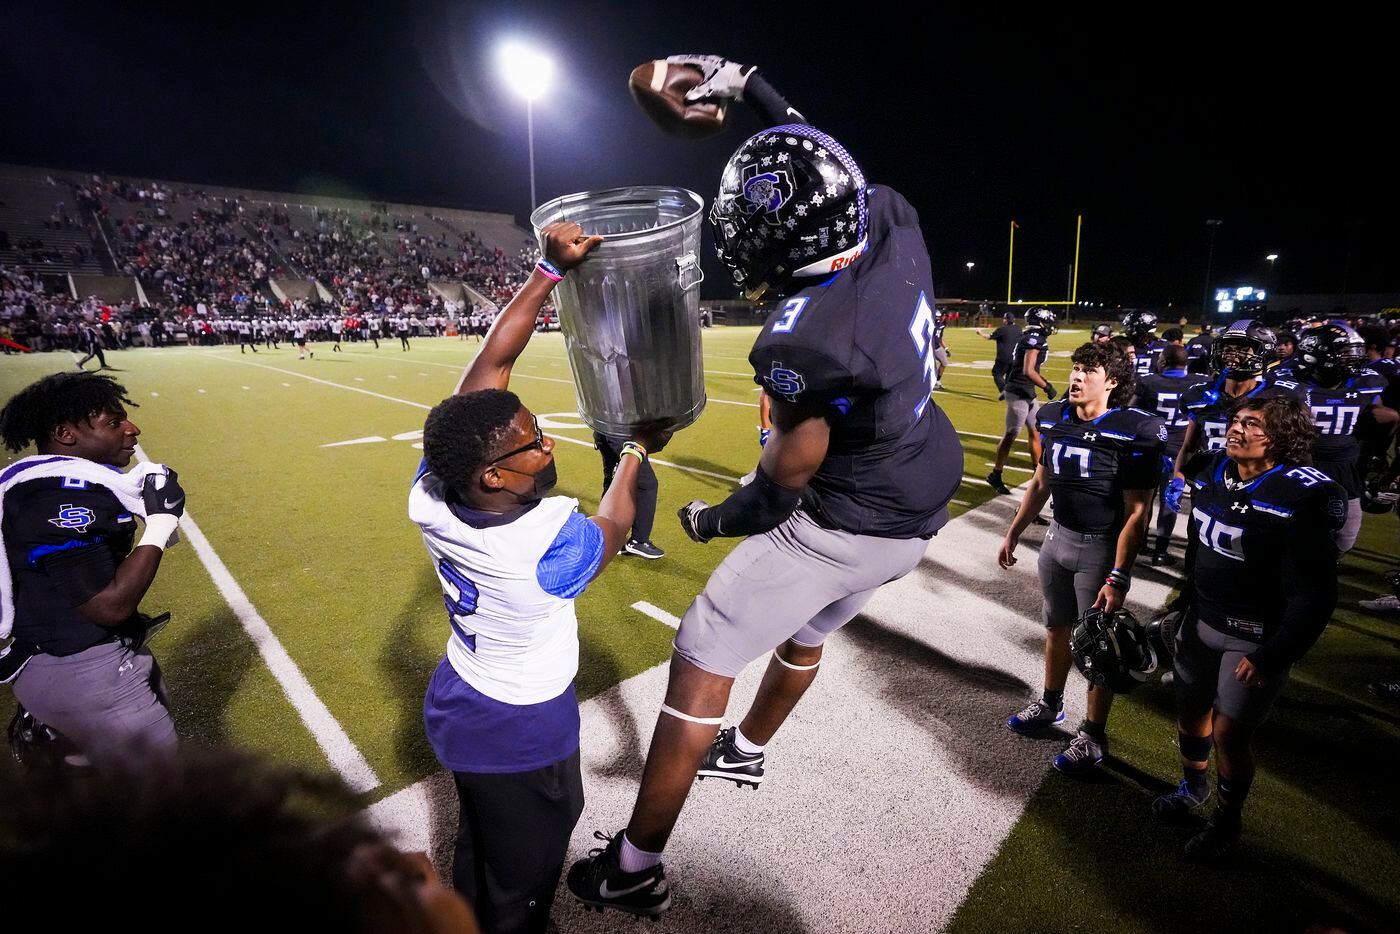 Mansfield Summit defensive back Ahmaad Moses (3) celebrates by dunking a football into a trash bin on the sideline after intercepting a Colleyville Heritage pass during the second half of the Class 5A Division I Region I final on Friday, Dec. 3, 2021, in North Richland Hills, Texas. (Smiley N. Pool/The Dallas Morning News)